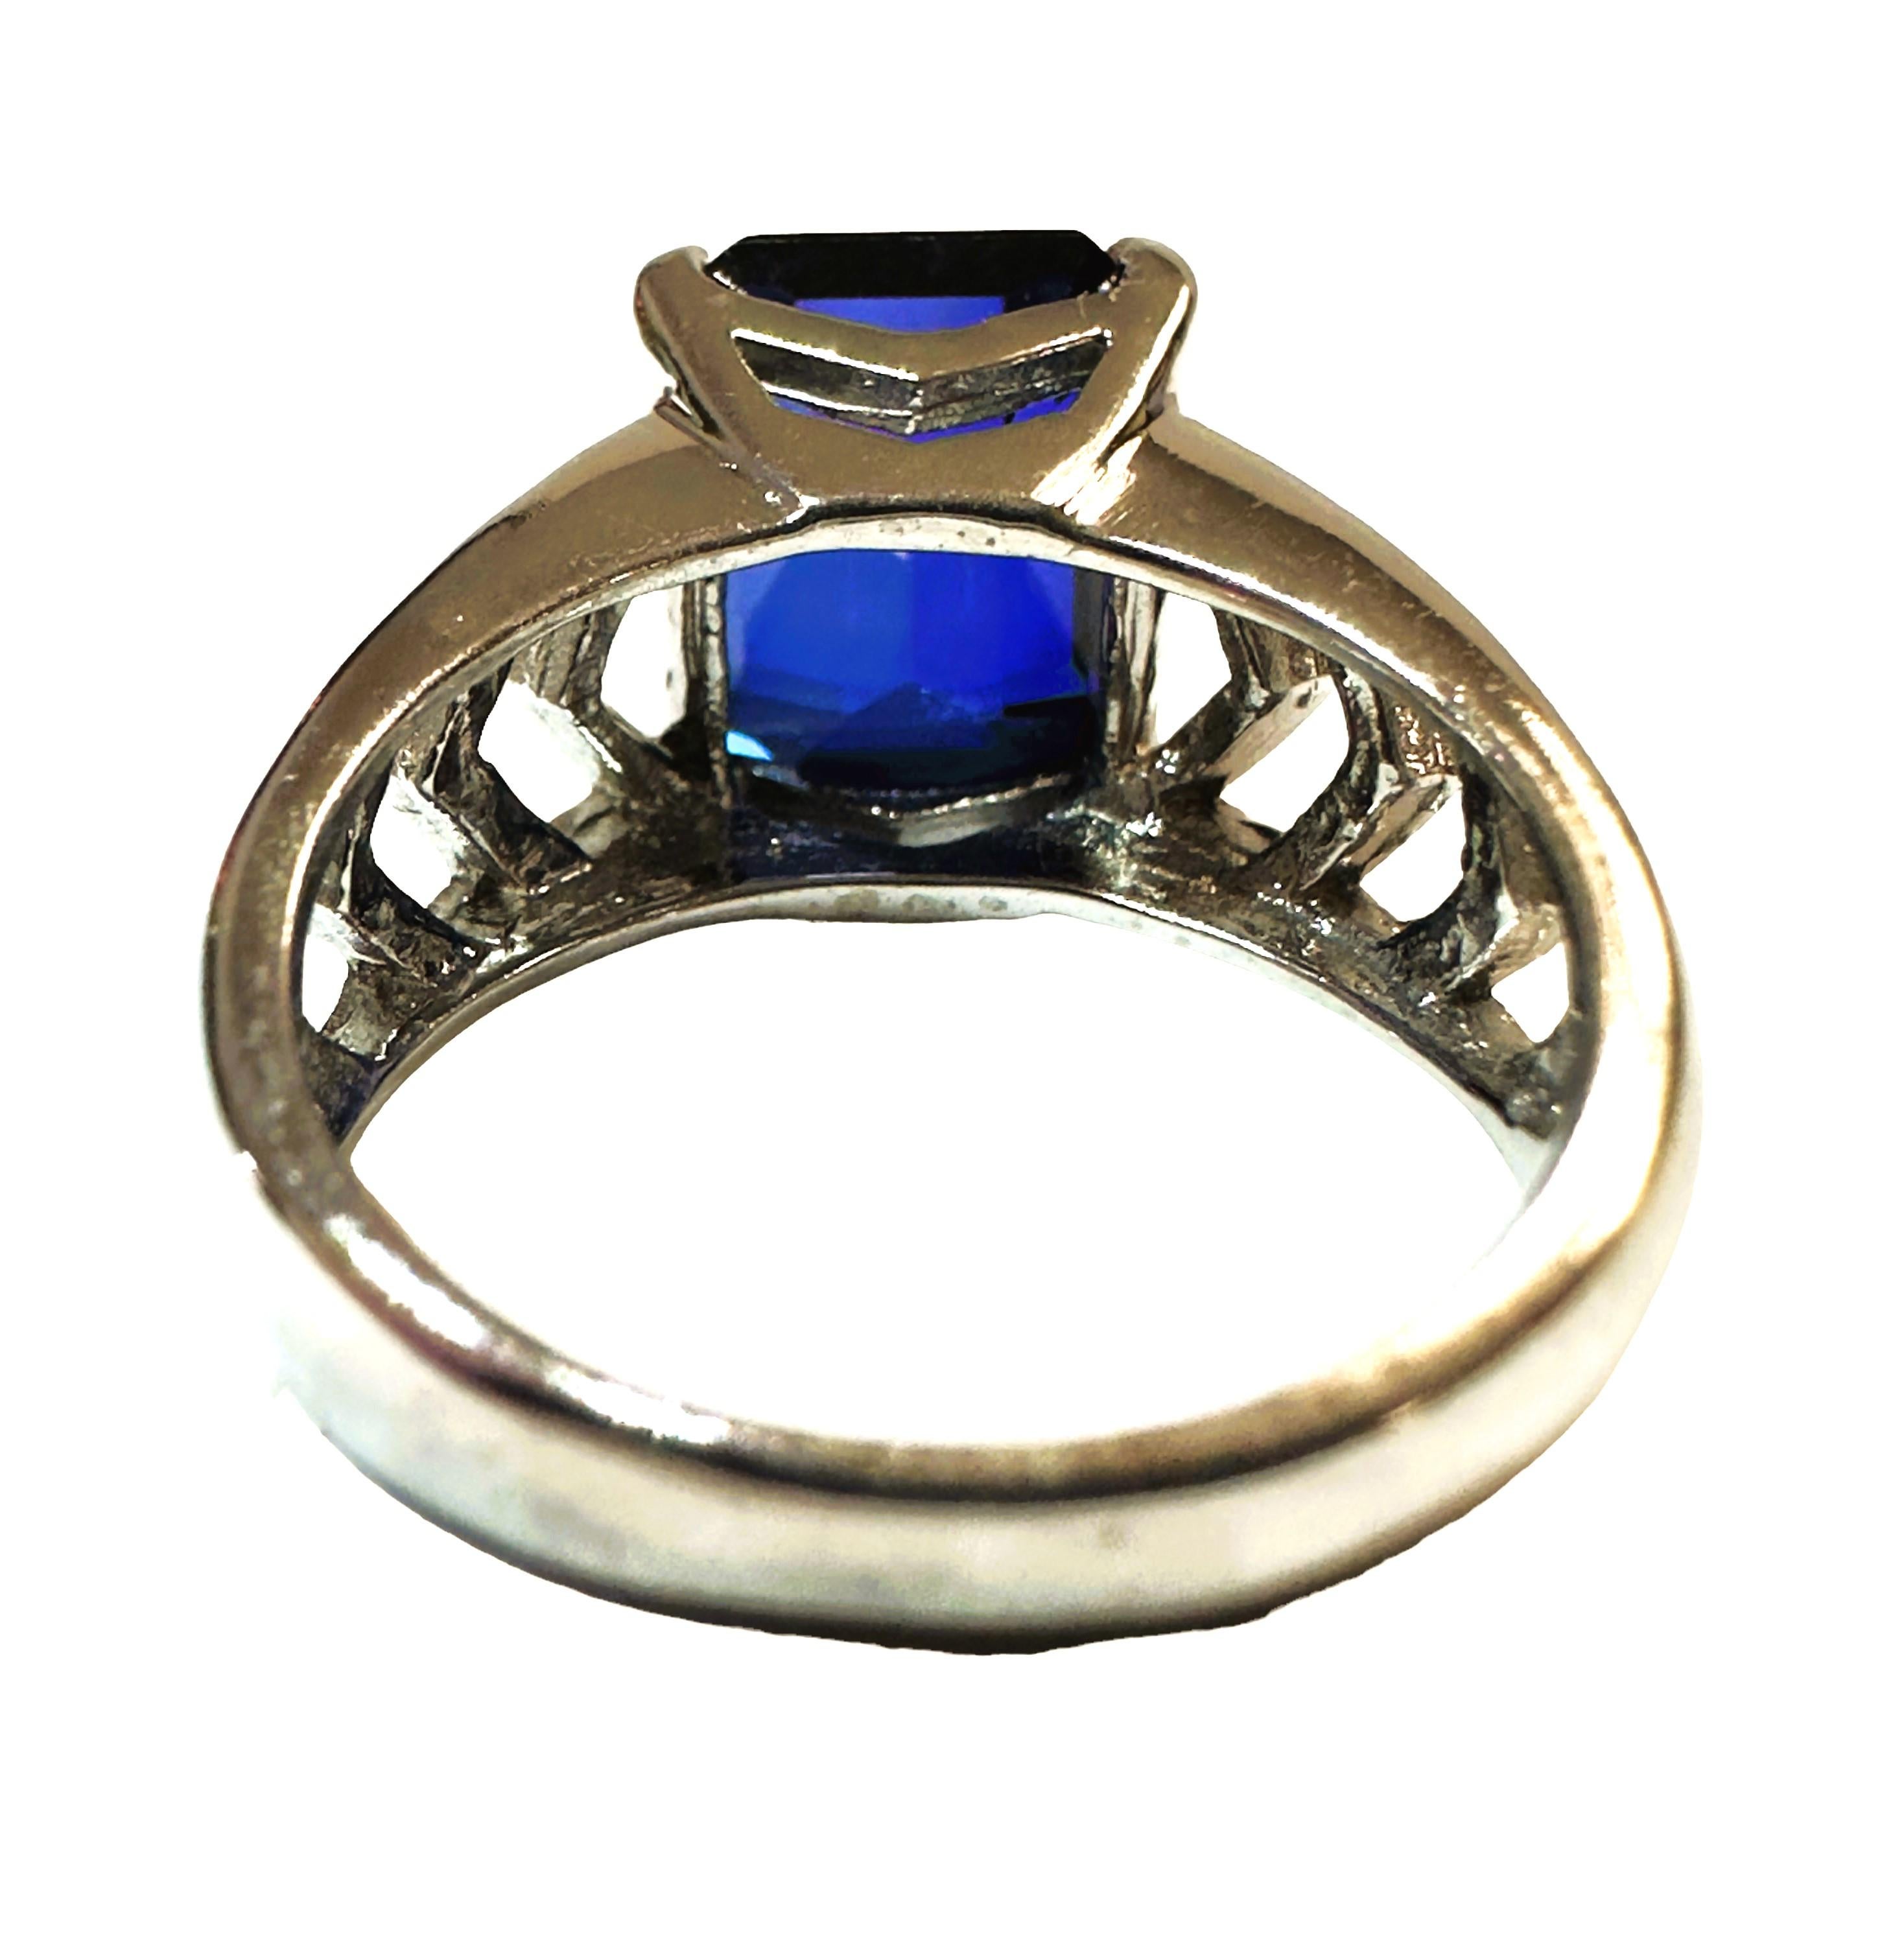 Emerald Cut New Handmade African 8.30 Ct Royal Blue Sapphire Sterling Ring Size 7.25 For Sale